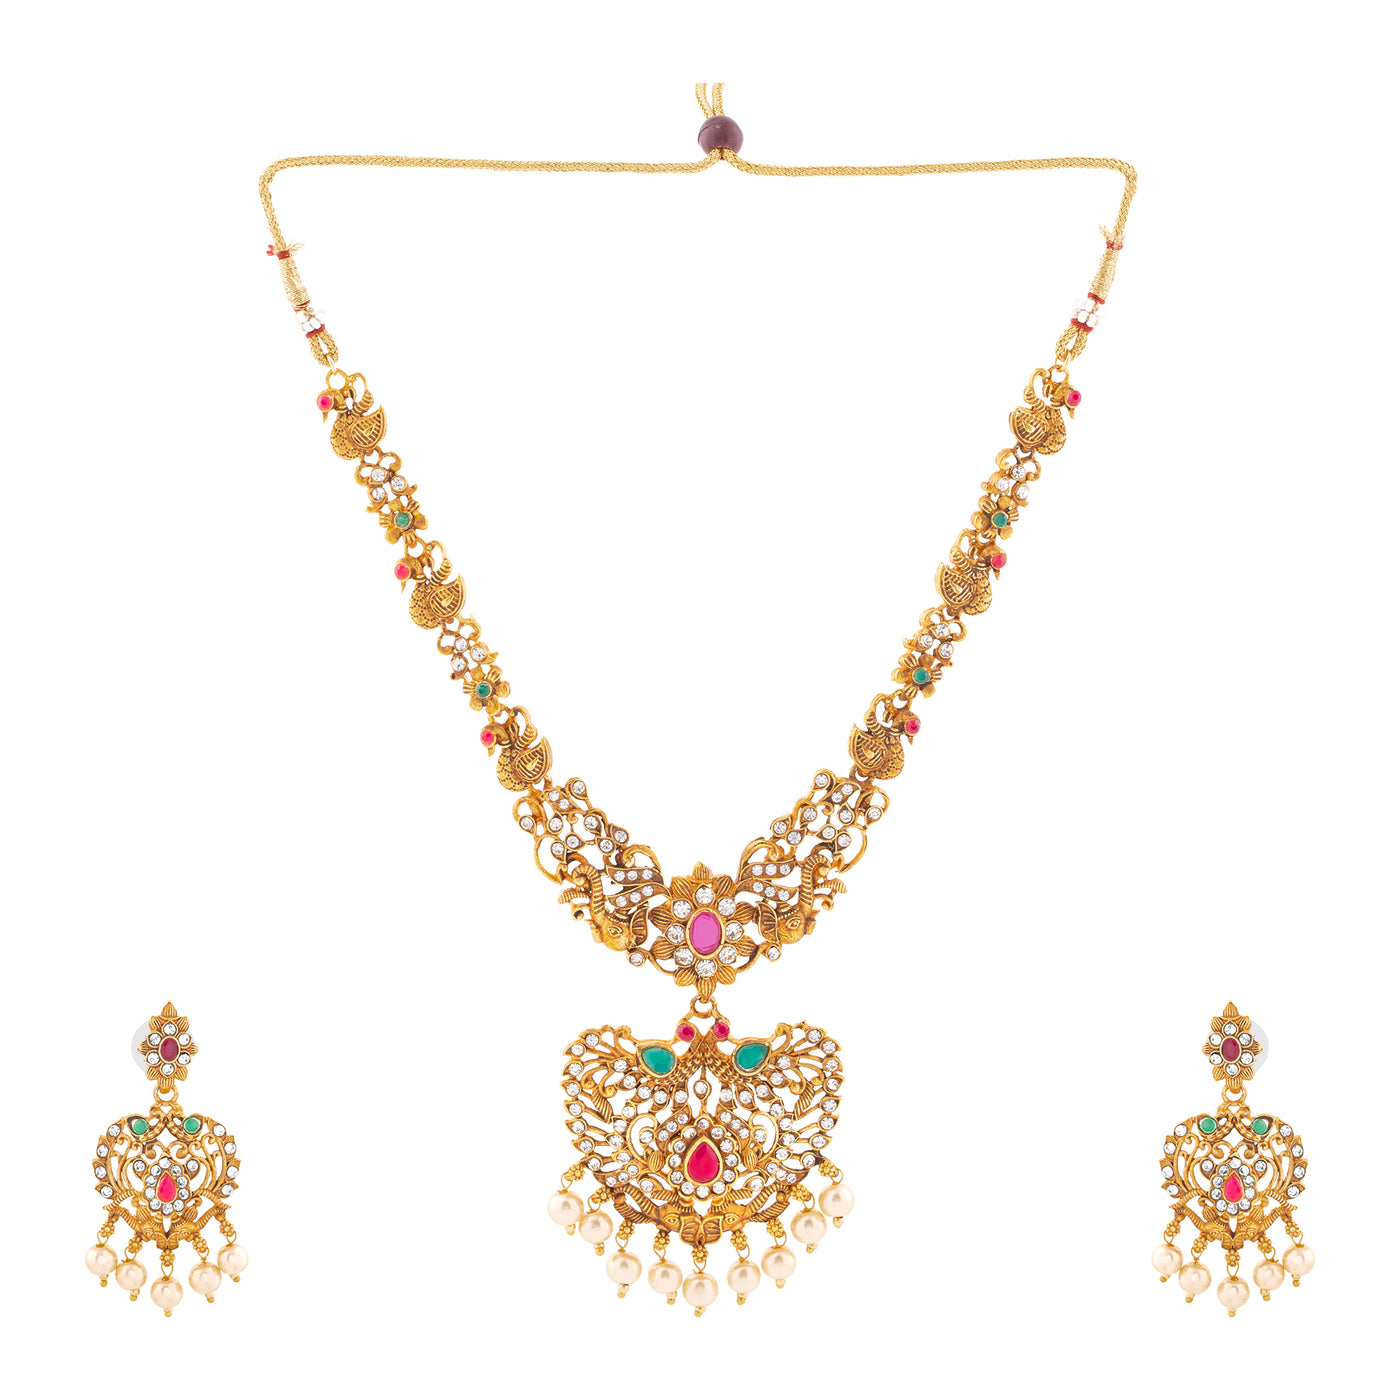 Estele Gold Plated Artistic Designer Bridal Long Necklace Set Combo with Color Stones & Pearls for Women